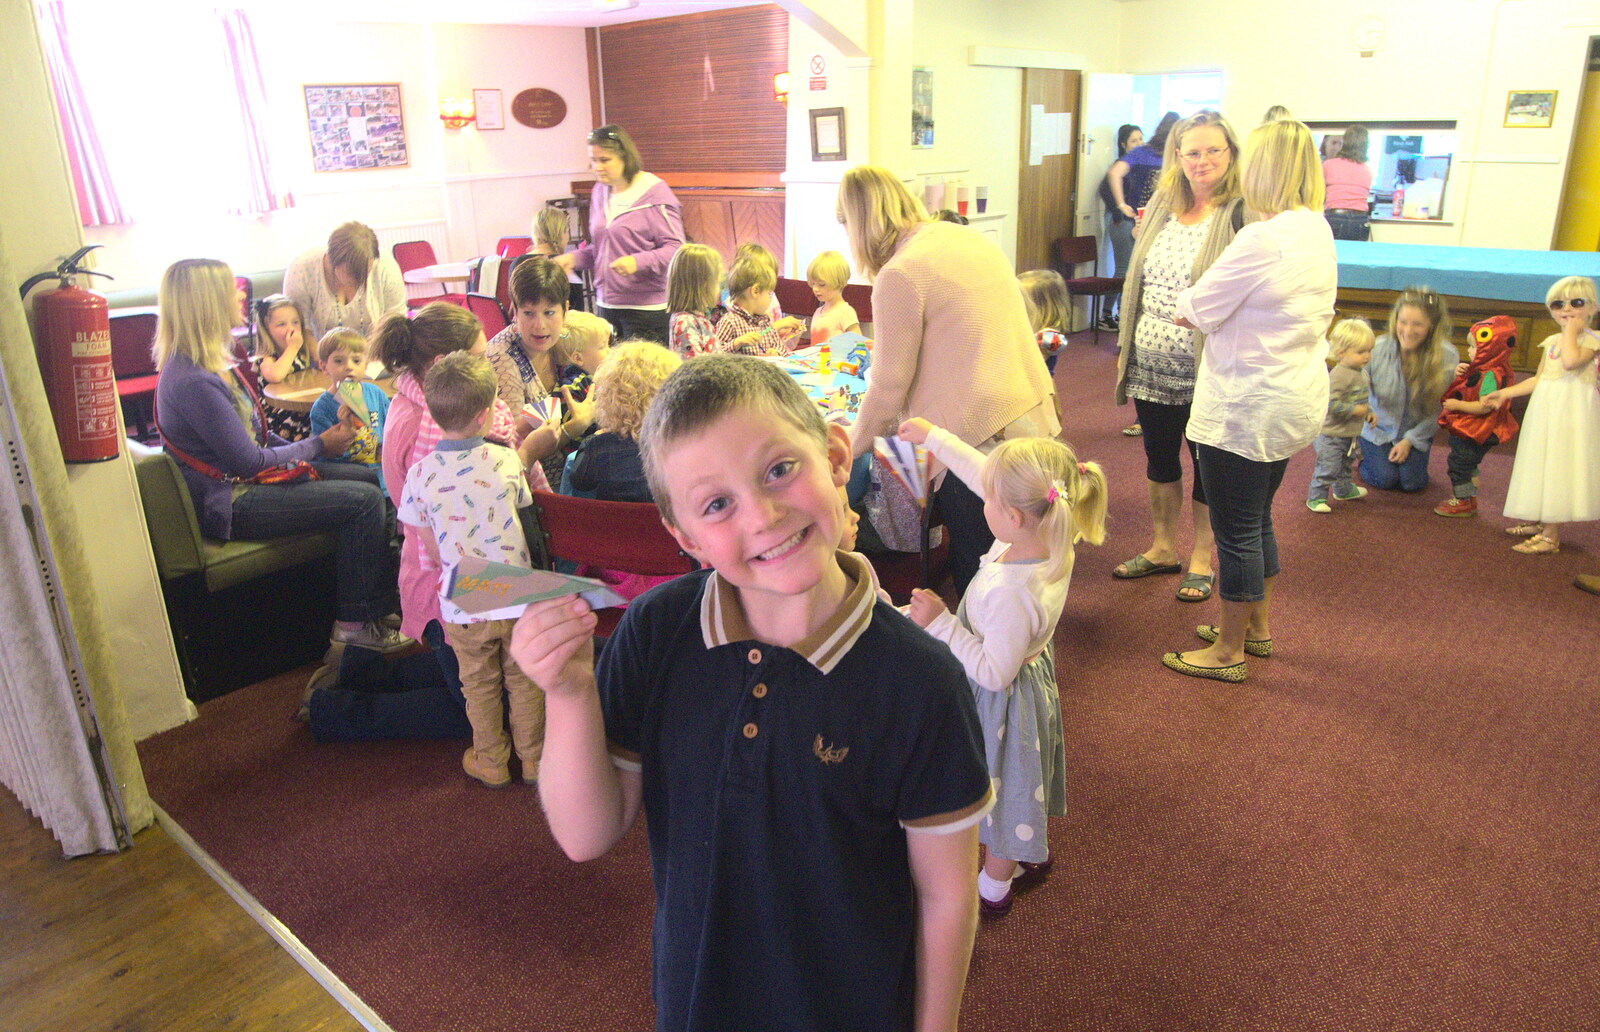 Matthew shows off his plane from Fred's Fifth Birthday, The Village Hall, Brome, Suffolk - 28th September 2013